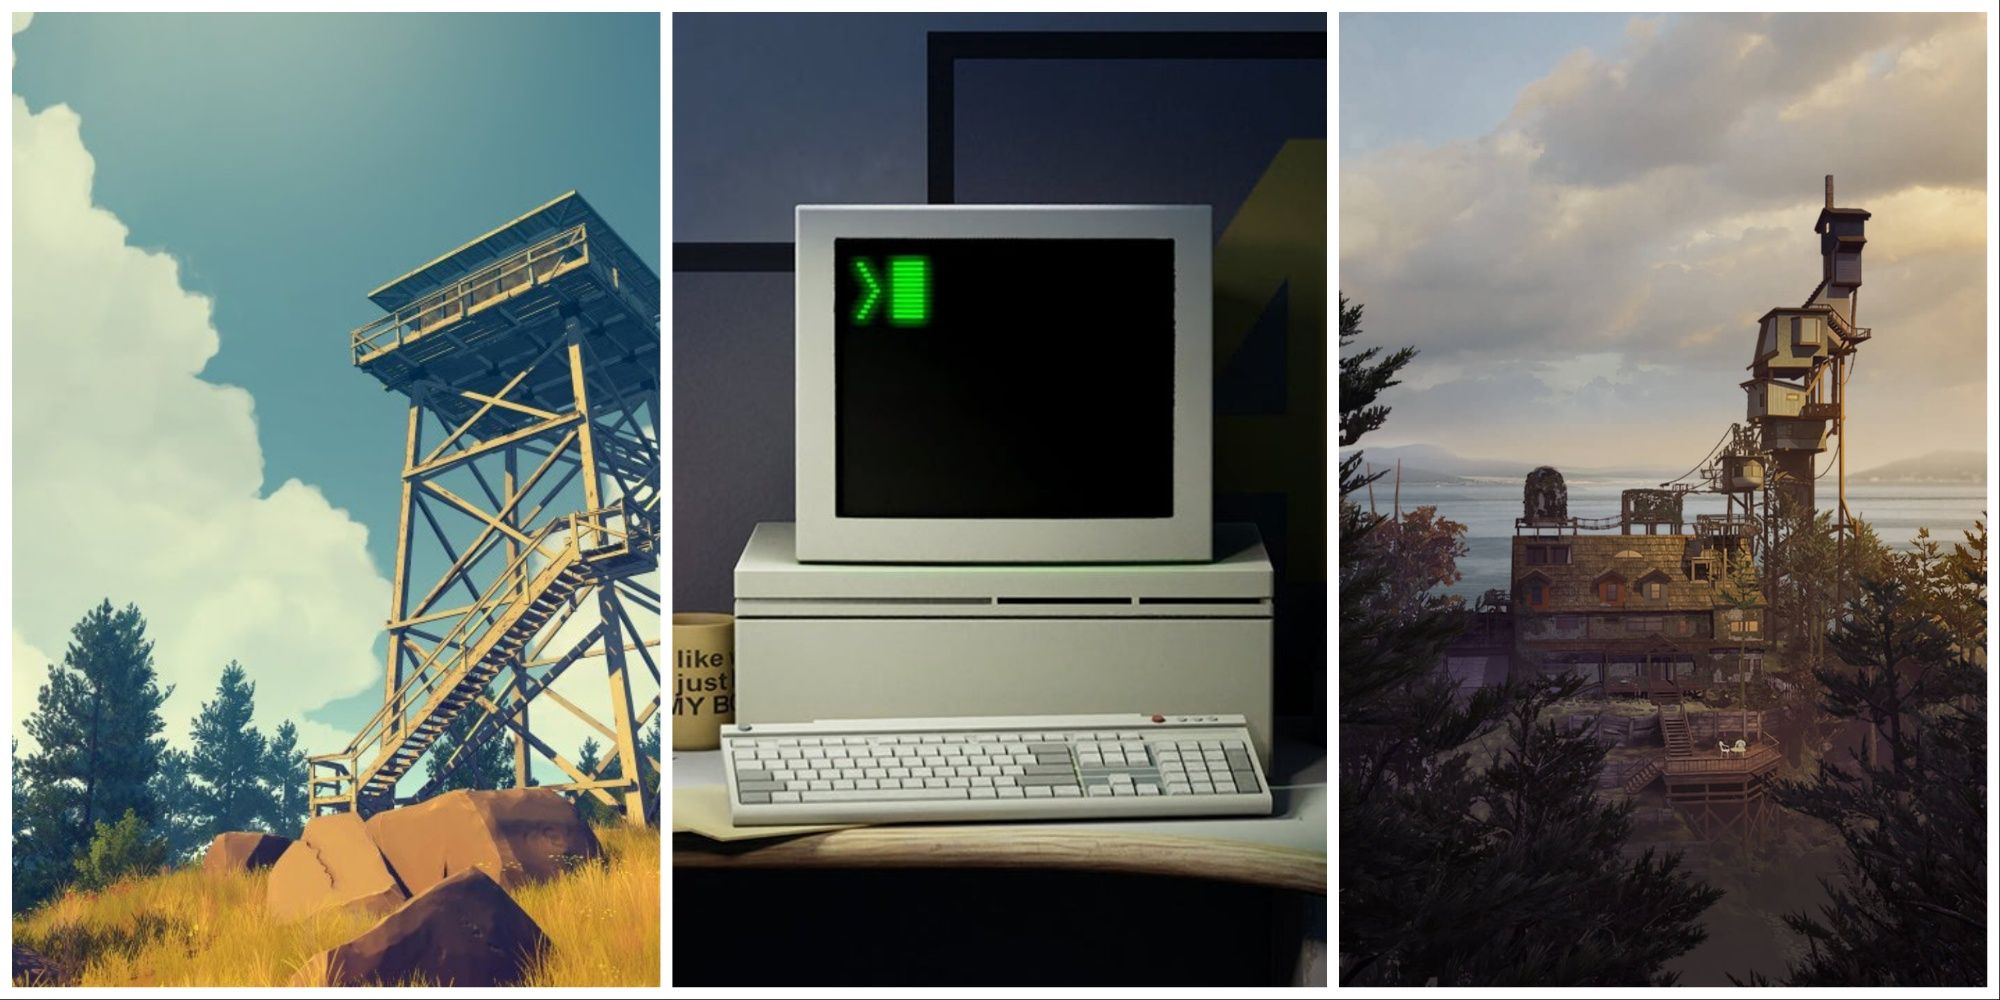 From left to right, a firewatch tower, an old PC monitor, and the Finch Family house